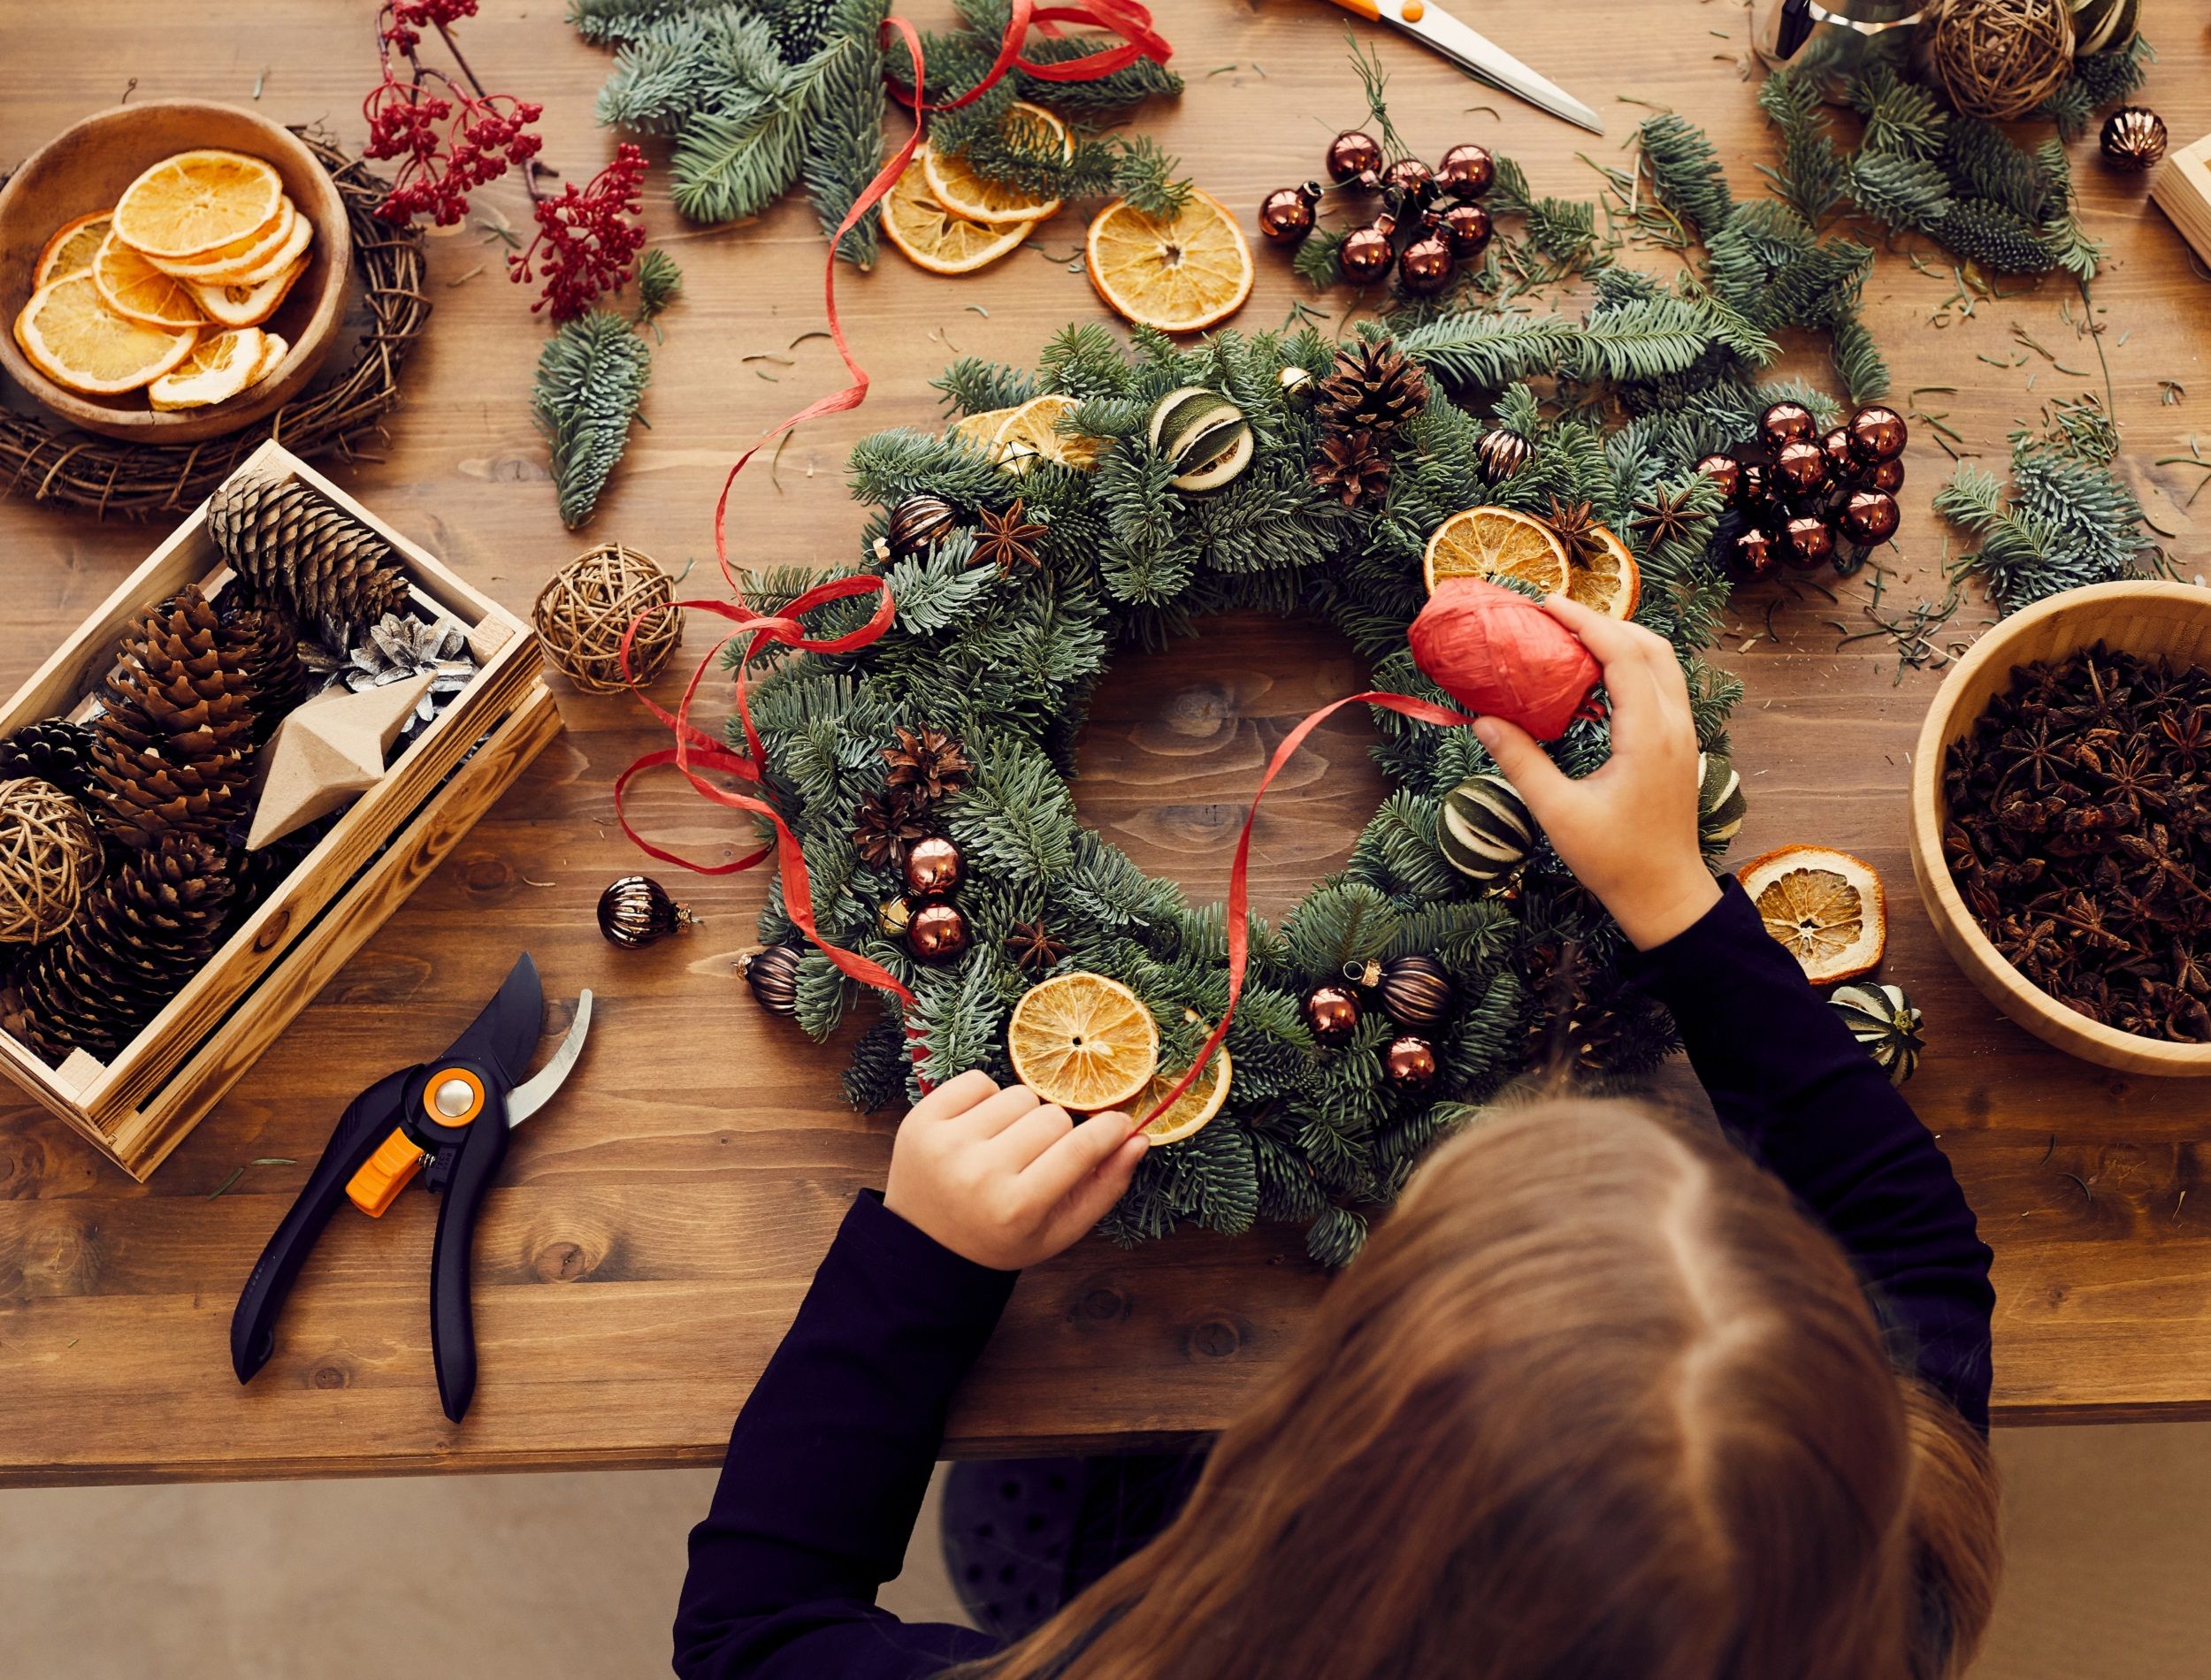 Making a DIY winter wreath with materials on table and person constructing